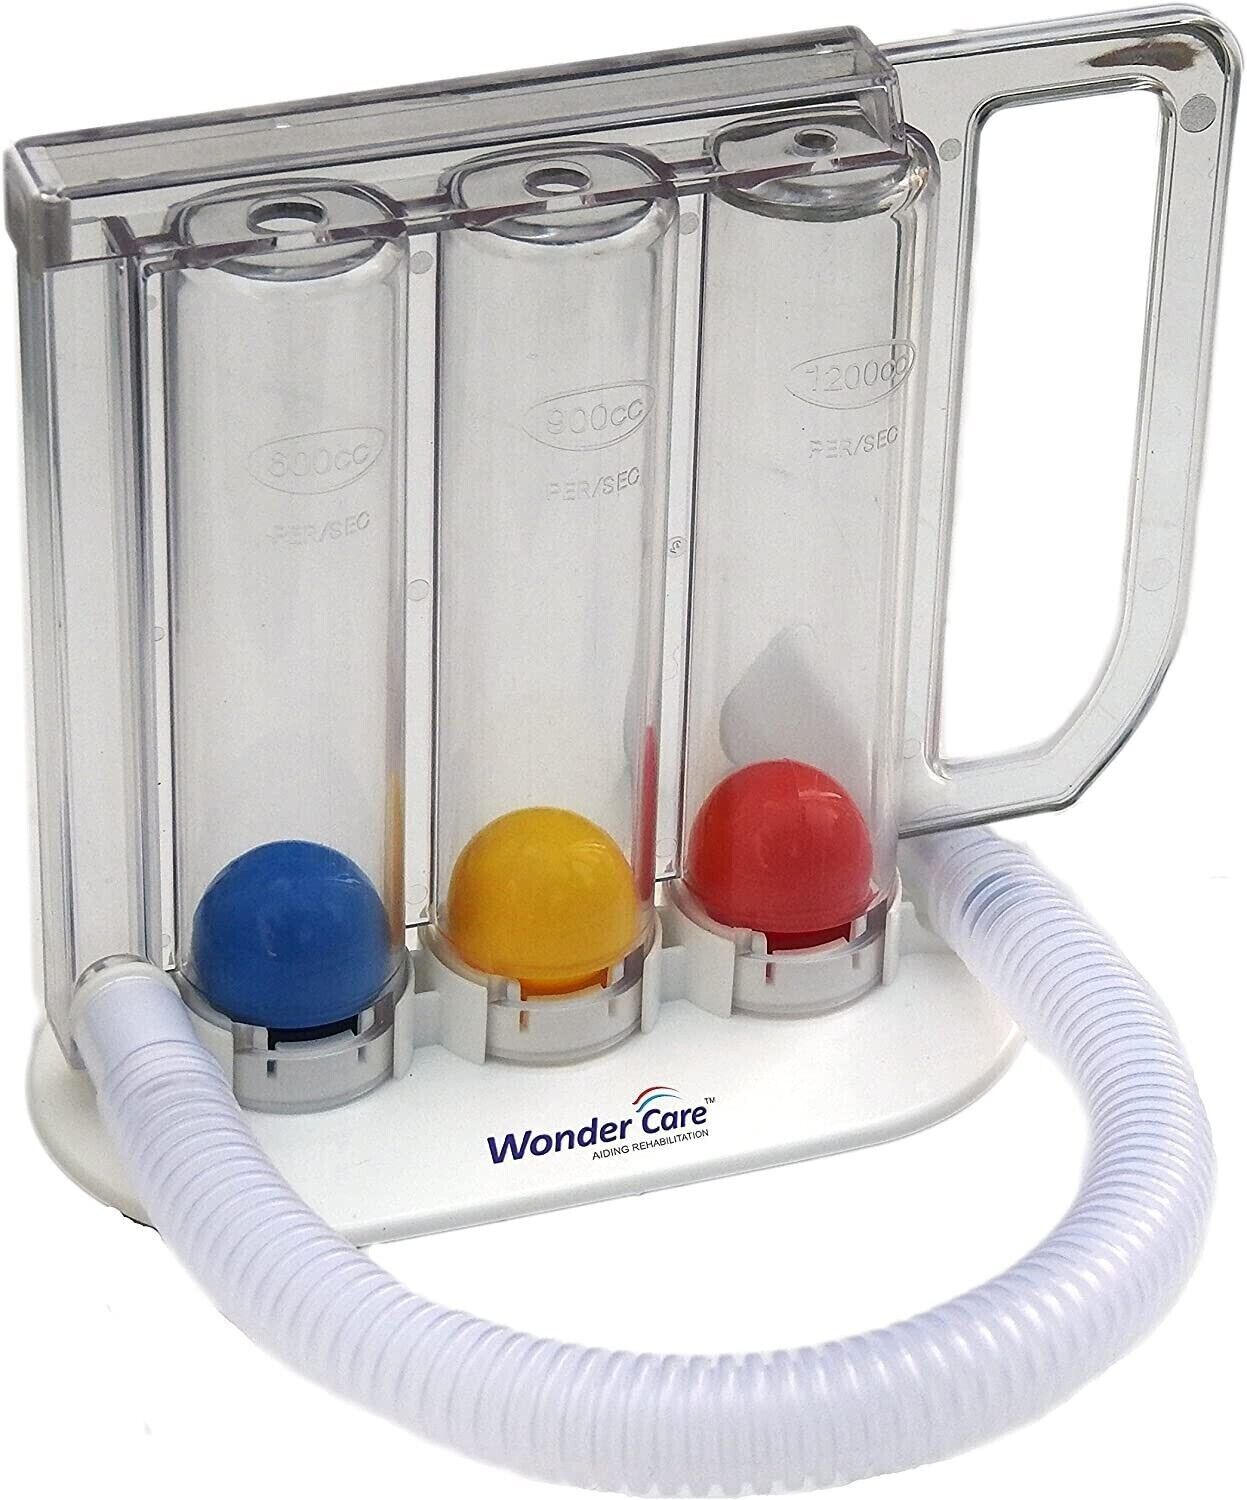 NEW Wonder Care Deep Breathing Lung Exerciser Washable & Hygienic Breath Measure wondercare